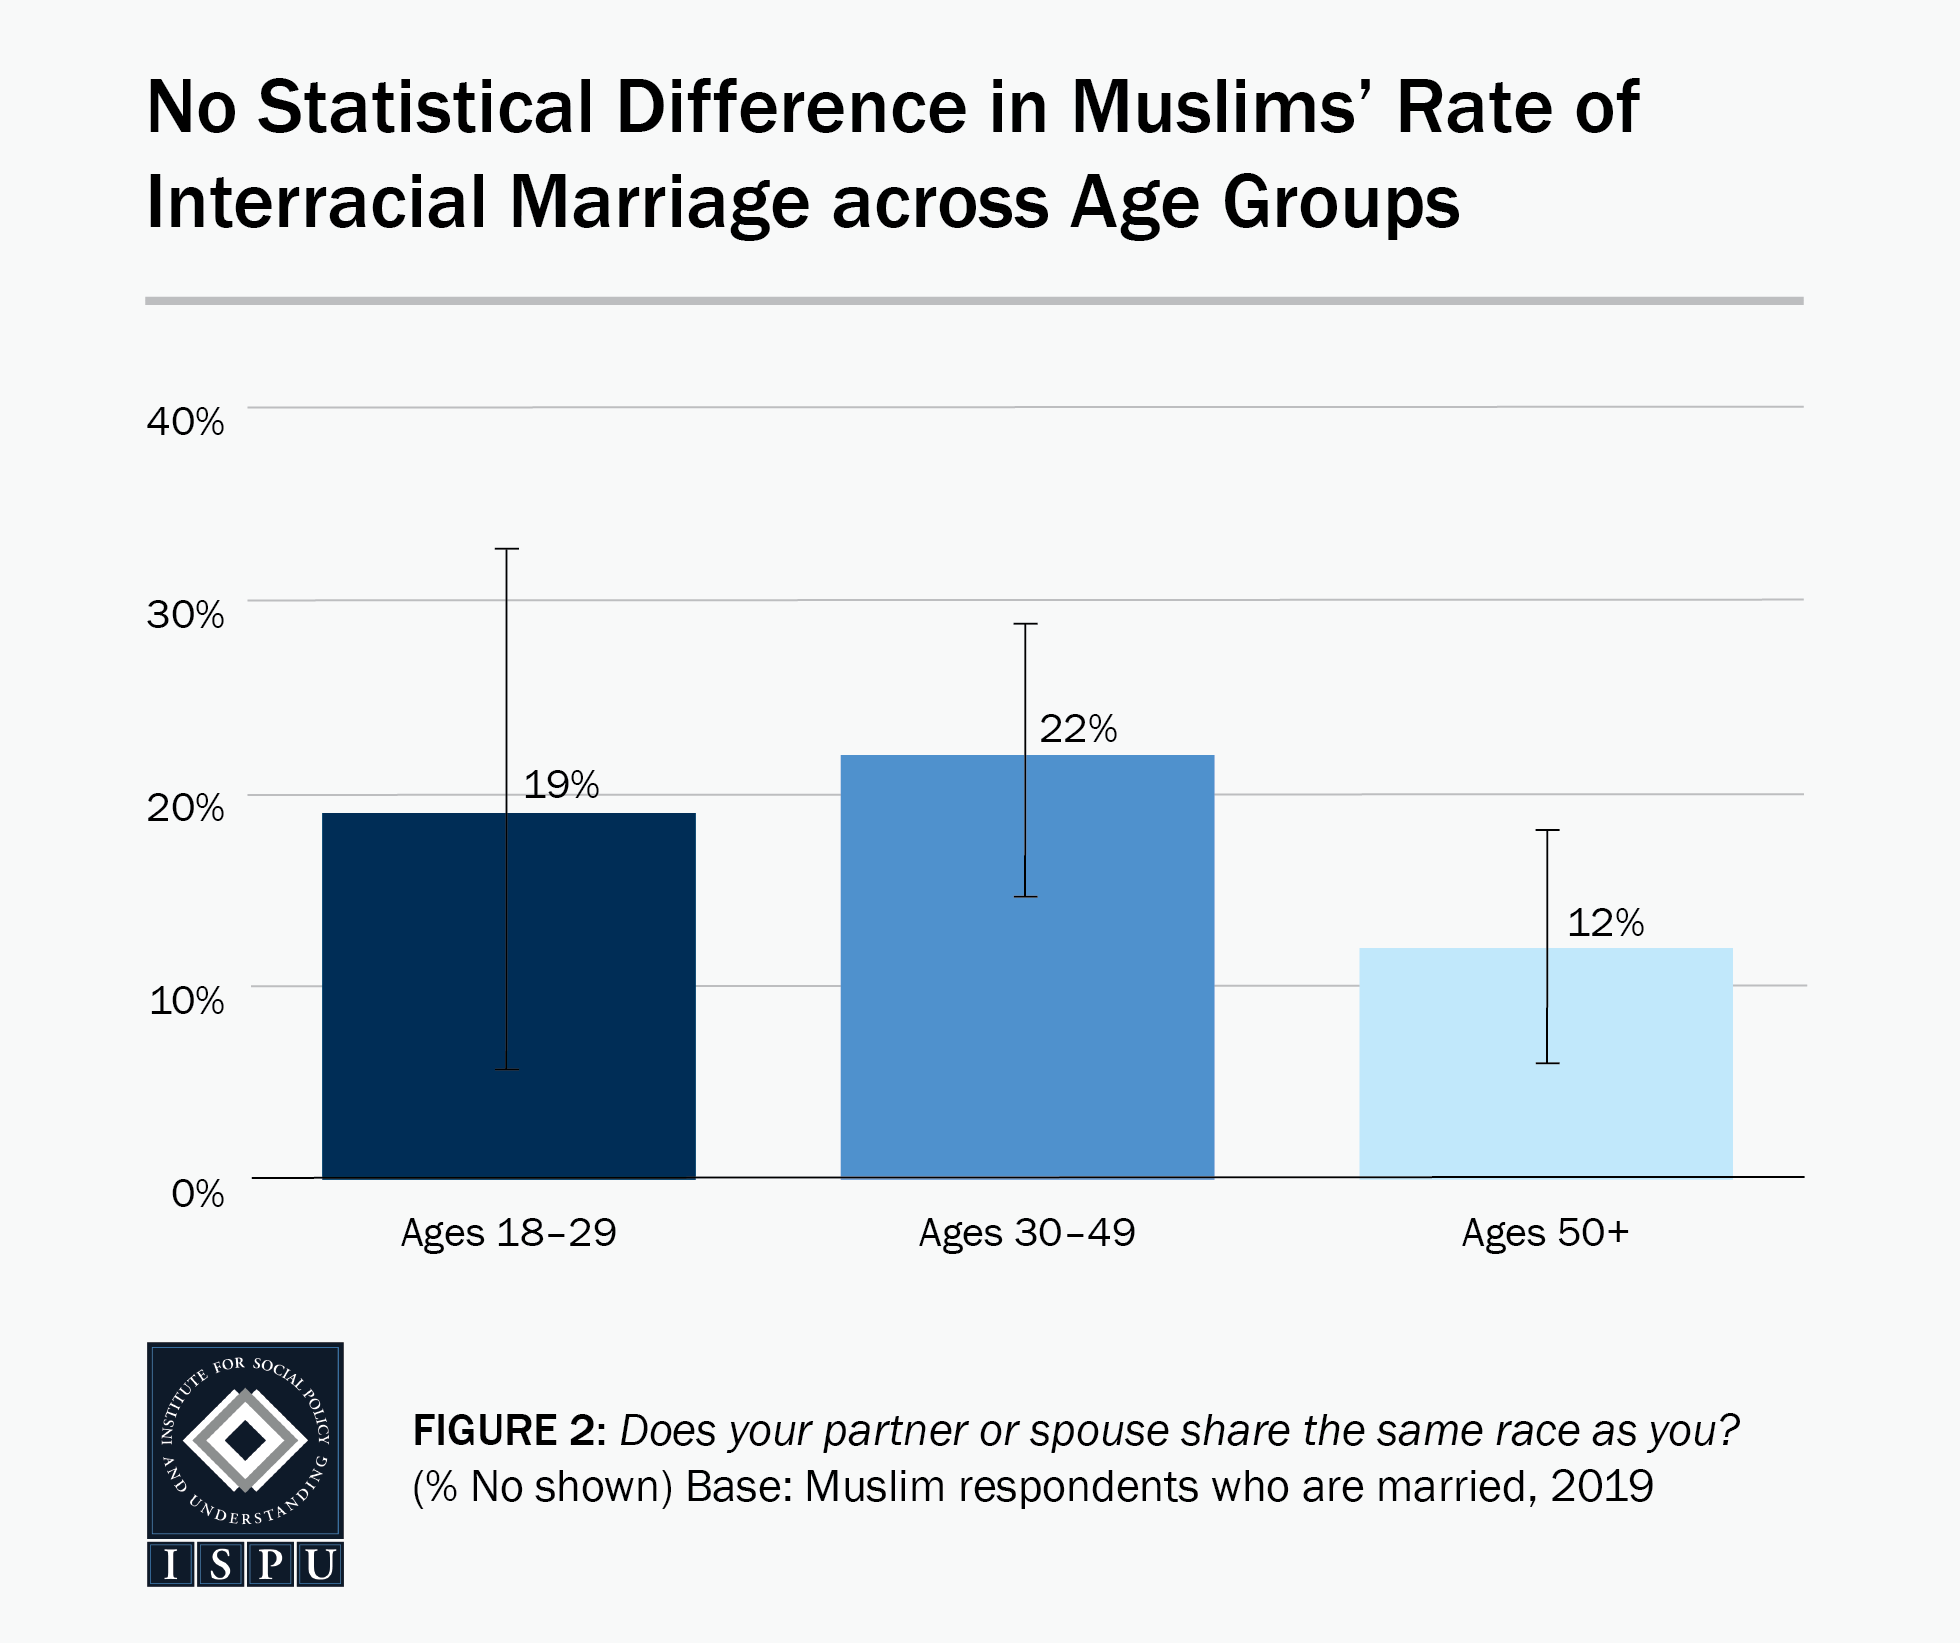 Figure 2: A bar graph showing that there is no statistical difference in Muslims' rate of interracial marriage across age groups